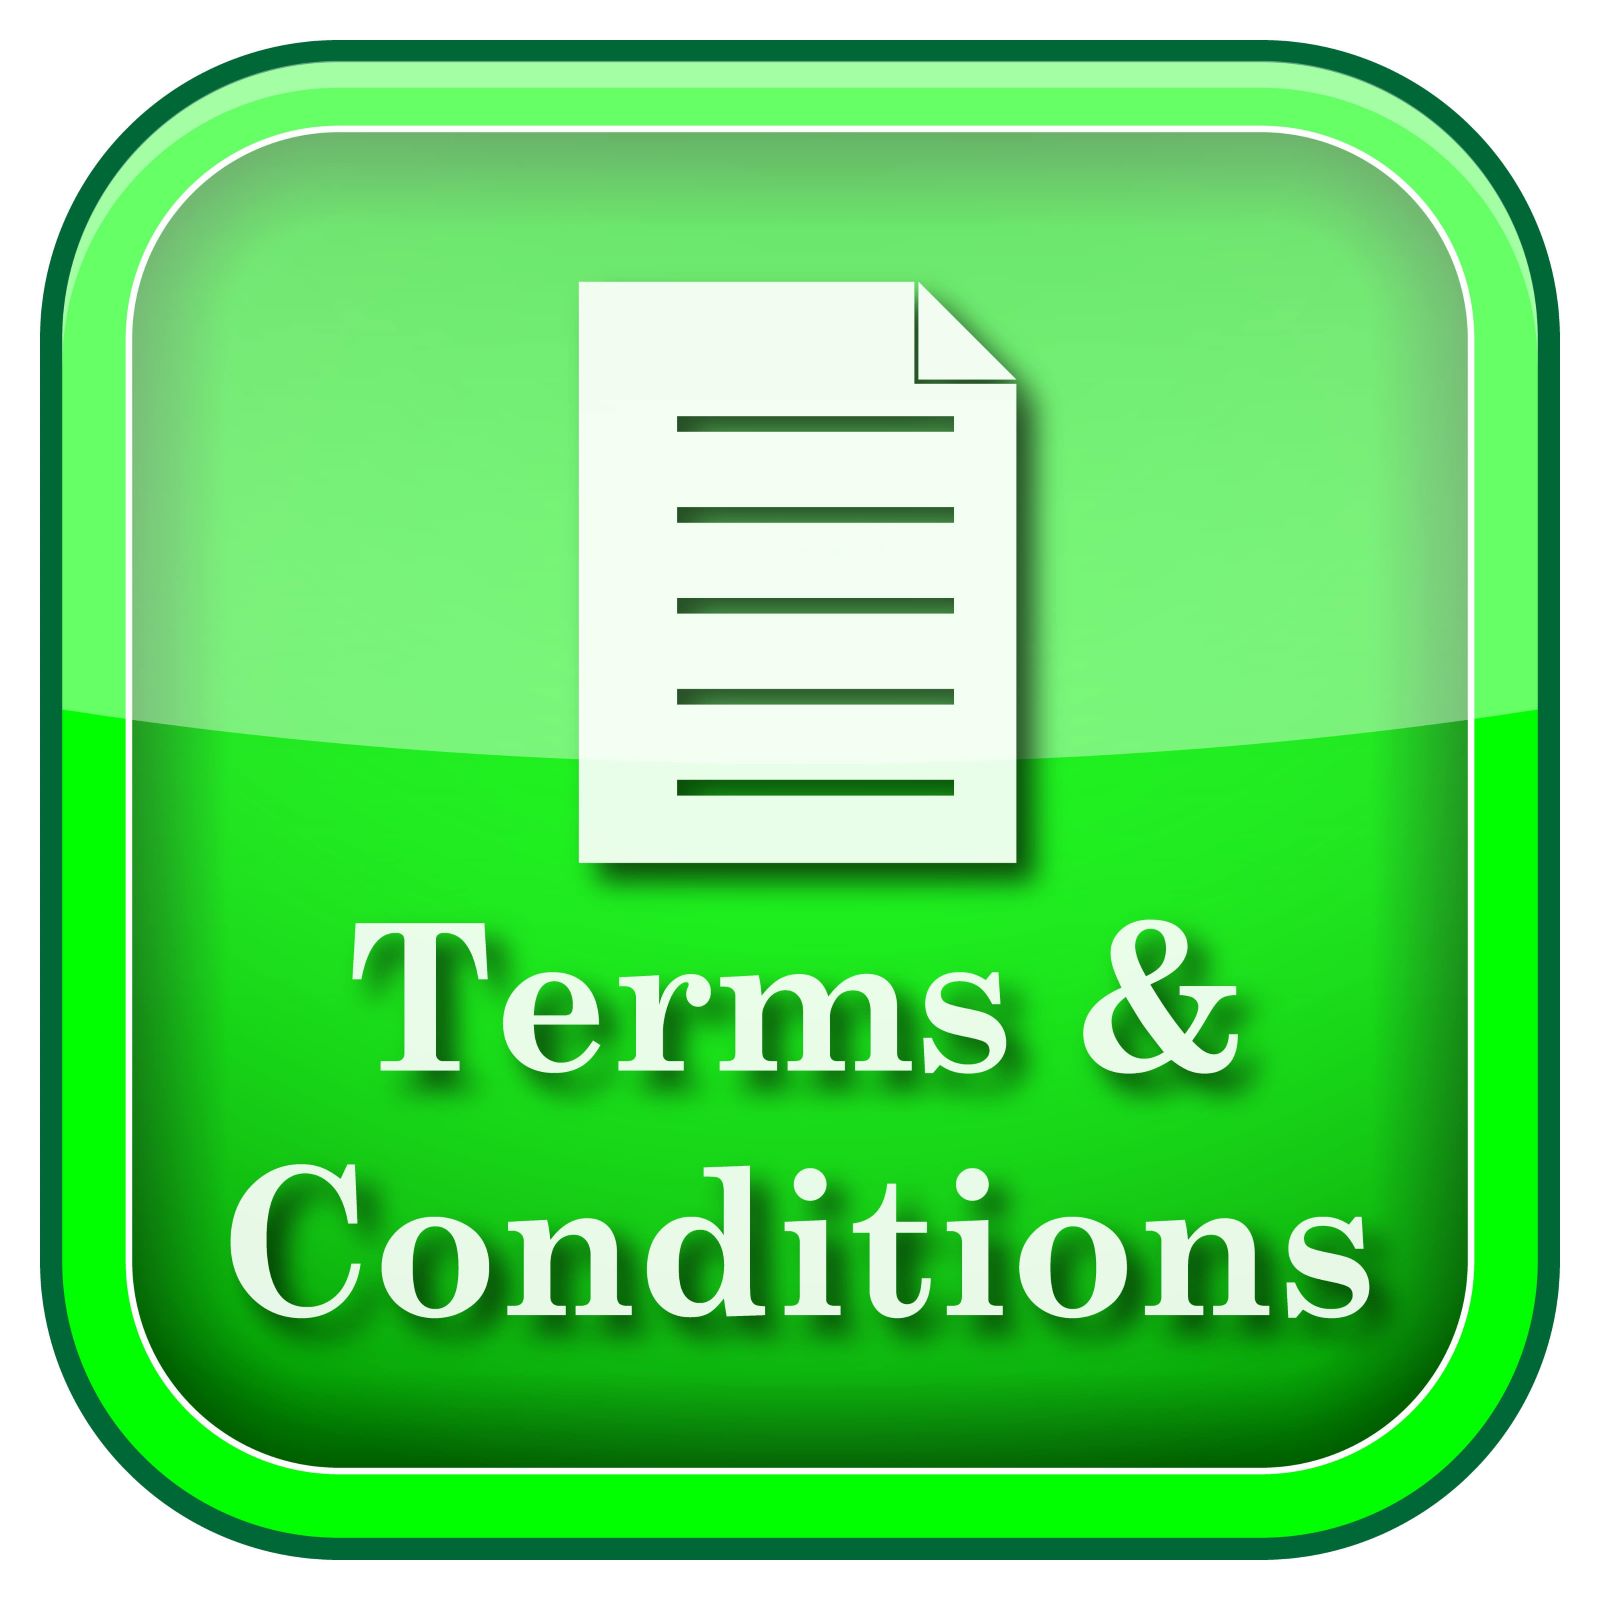 Covid 19 Guidelines • Terms & Conditions • Cancelation Policy